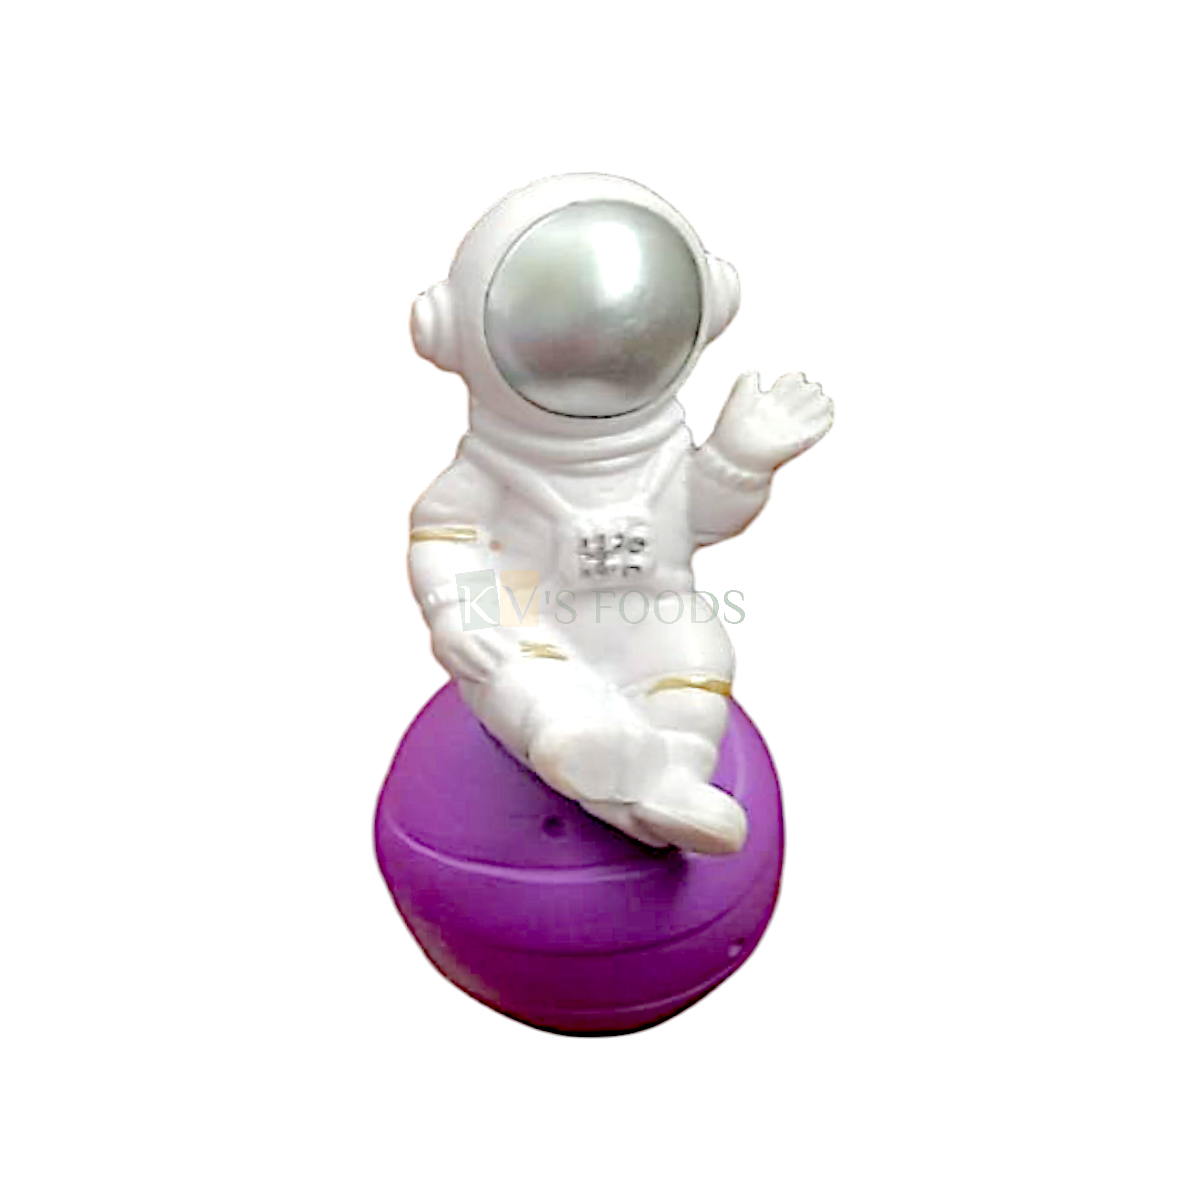 1PC Sitting Astronaut Spaceman Action Figurine on Earth Globe Cake Topper, Galaxy Space Boys Happy Birthday Theme Cake Decoration, Miniature Figurine, Figure for Shelf Bookstore Office Car Dashboard